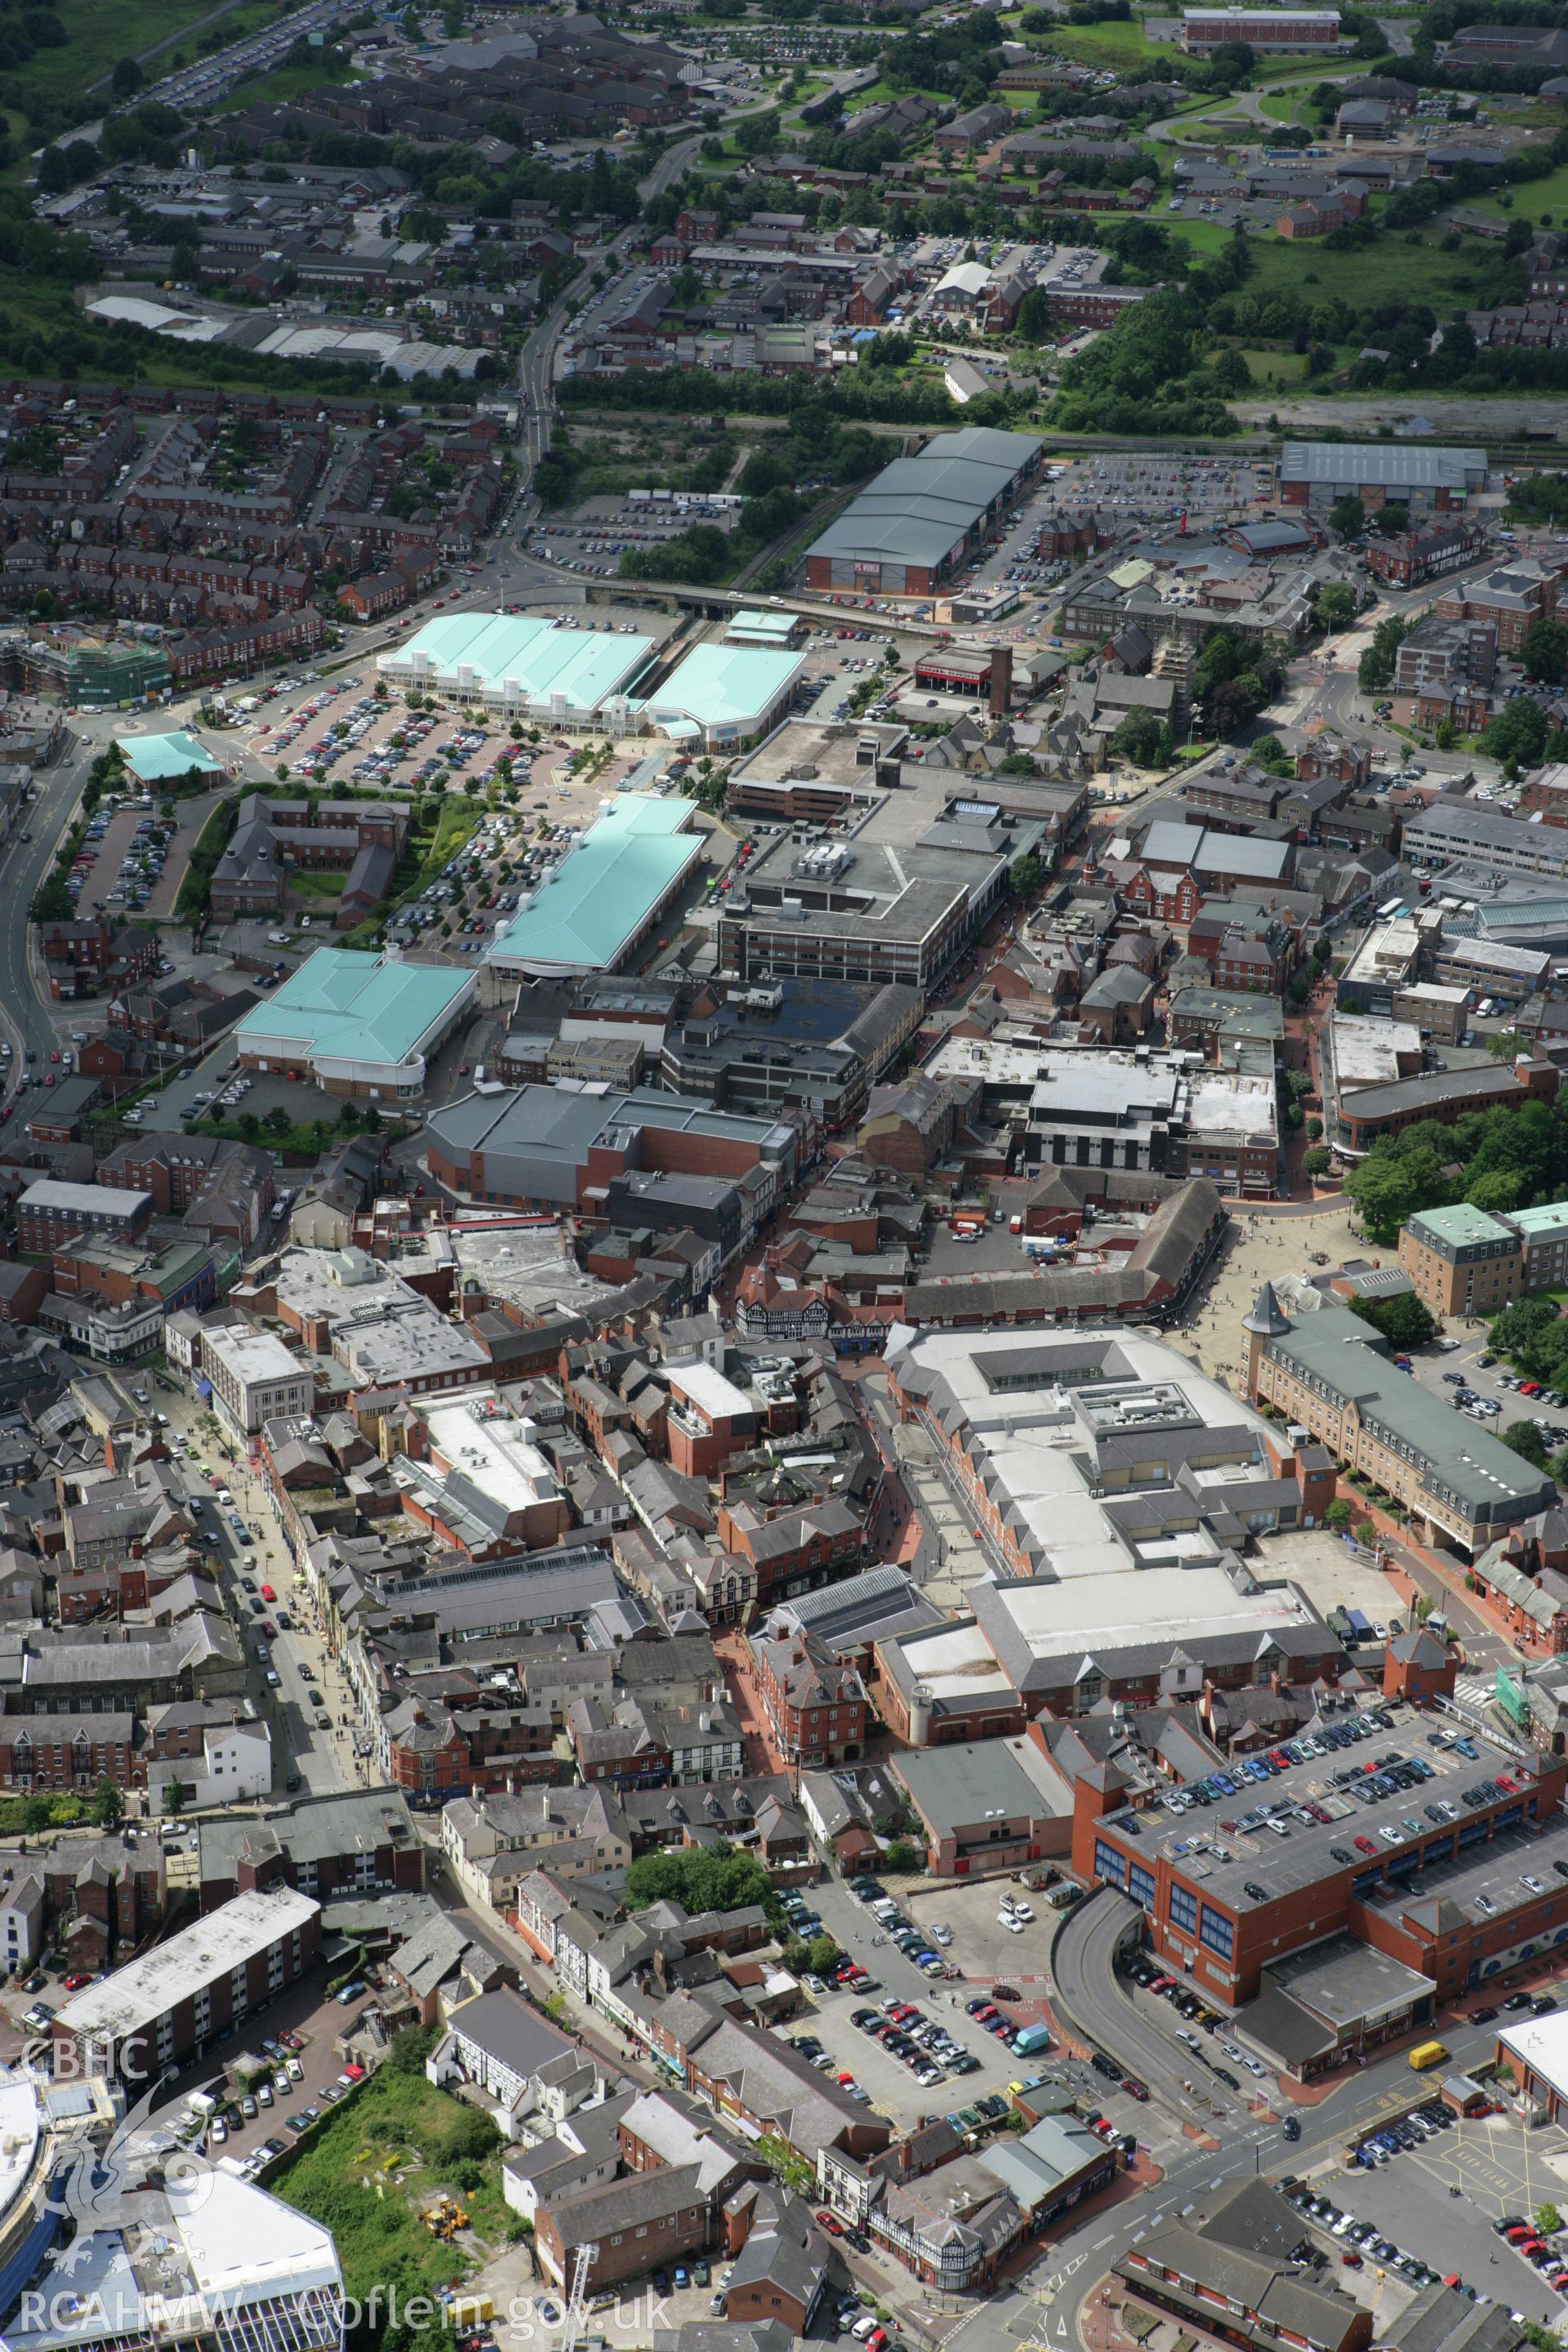 RCAHMW colour oblique aerial photograph of Wrexham showing the town centre. Taken on 24 July 2007 by Toby Driver